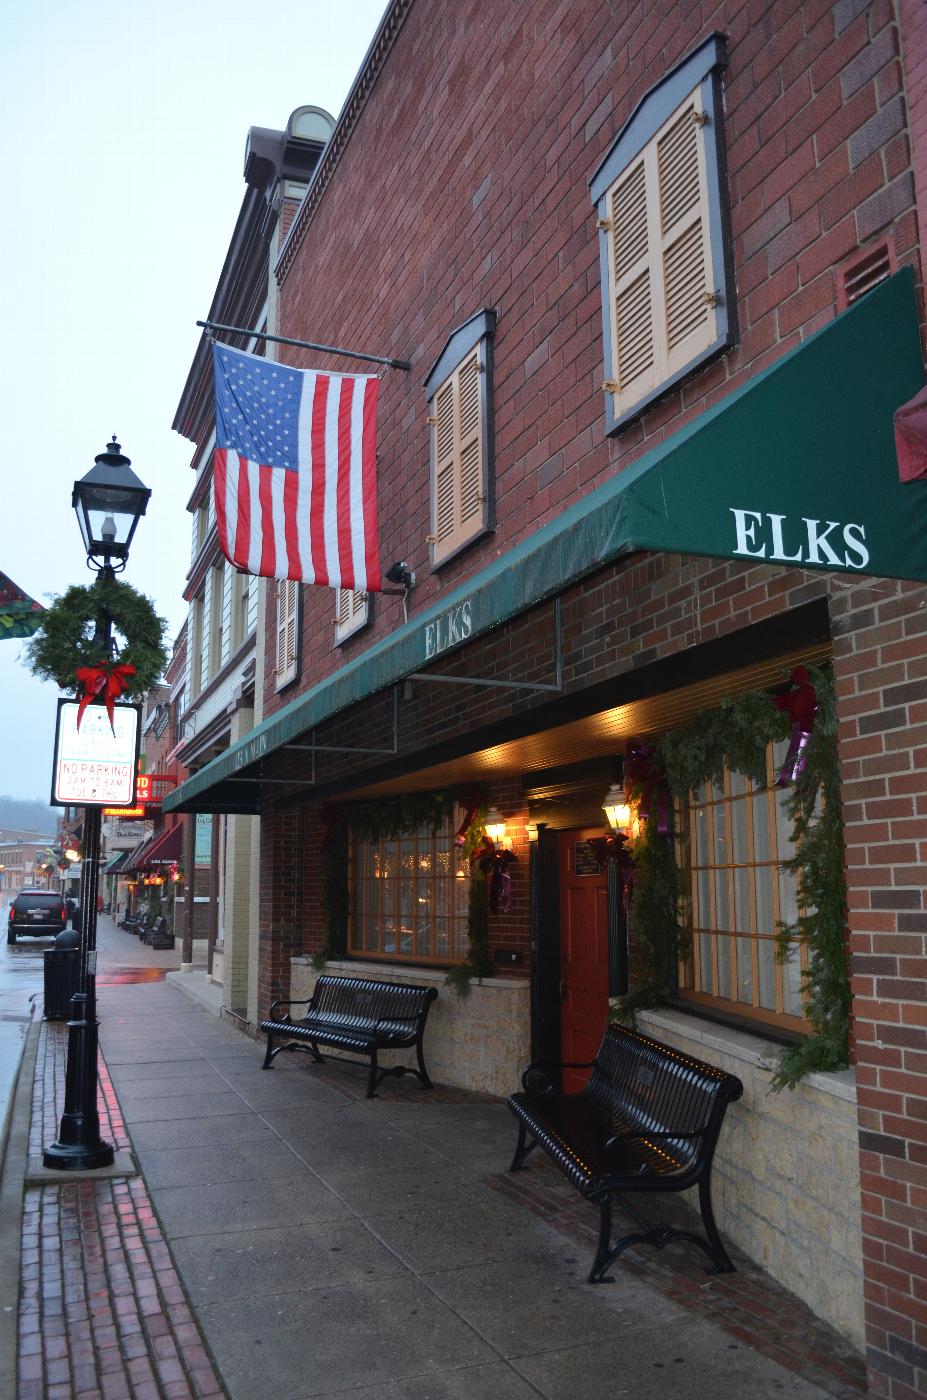 Merry Christmas from Galena Elks!